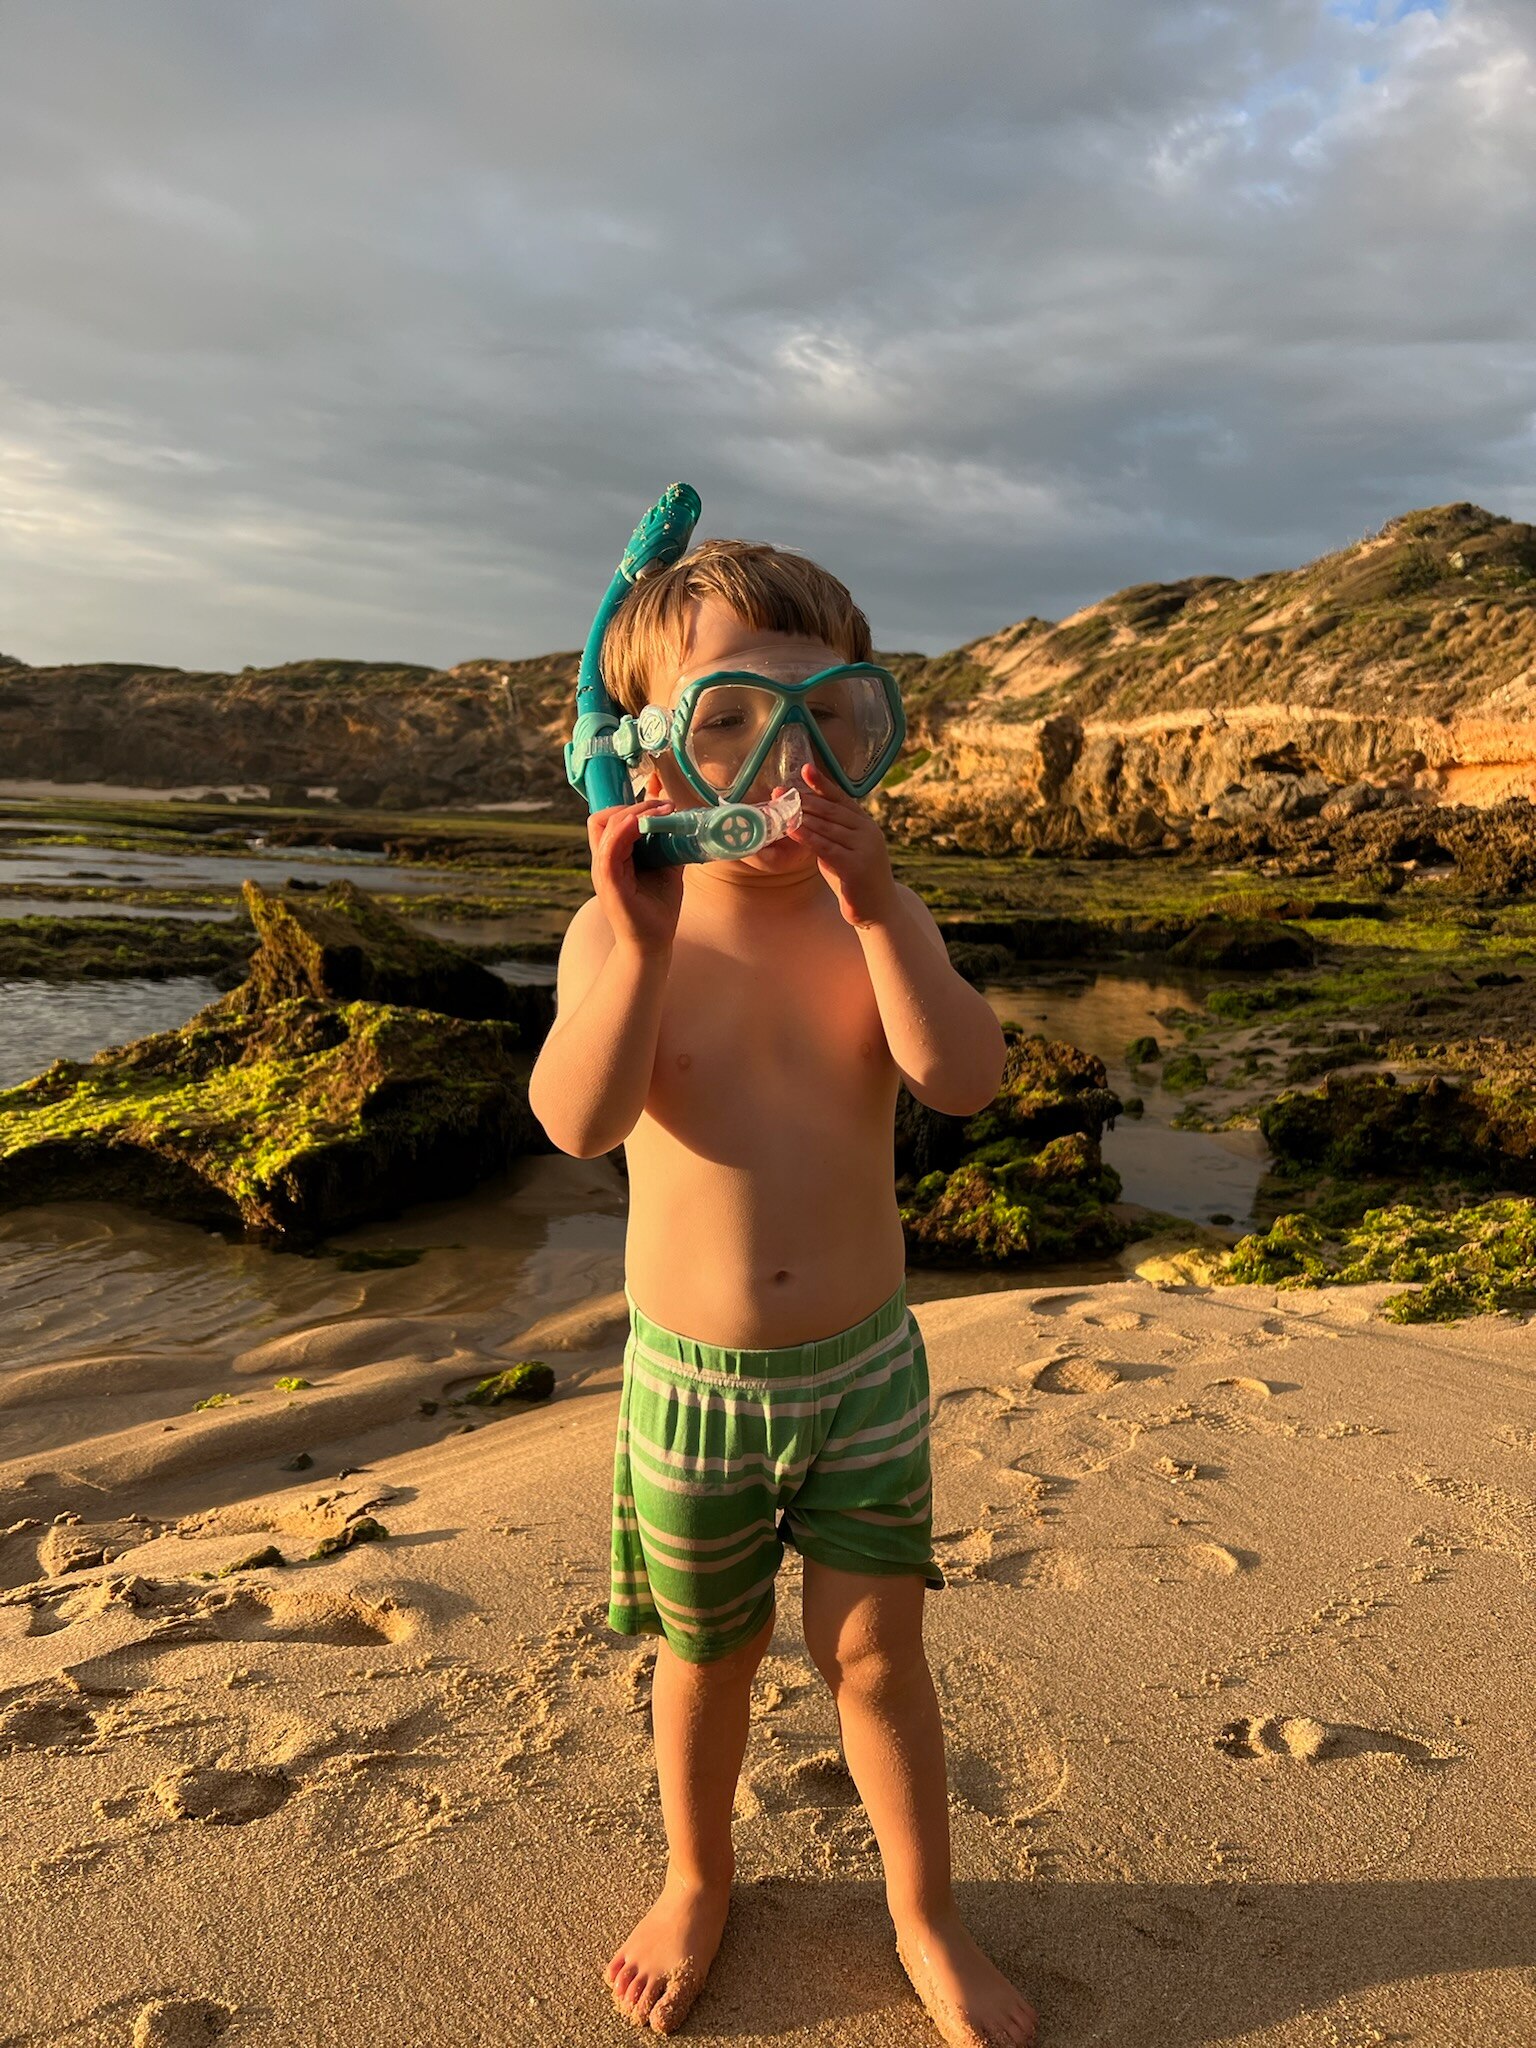 A small boy in bathers and a blue snorkel in front of some rocks.